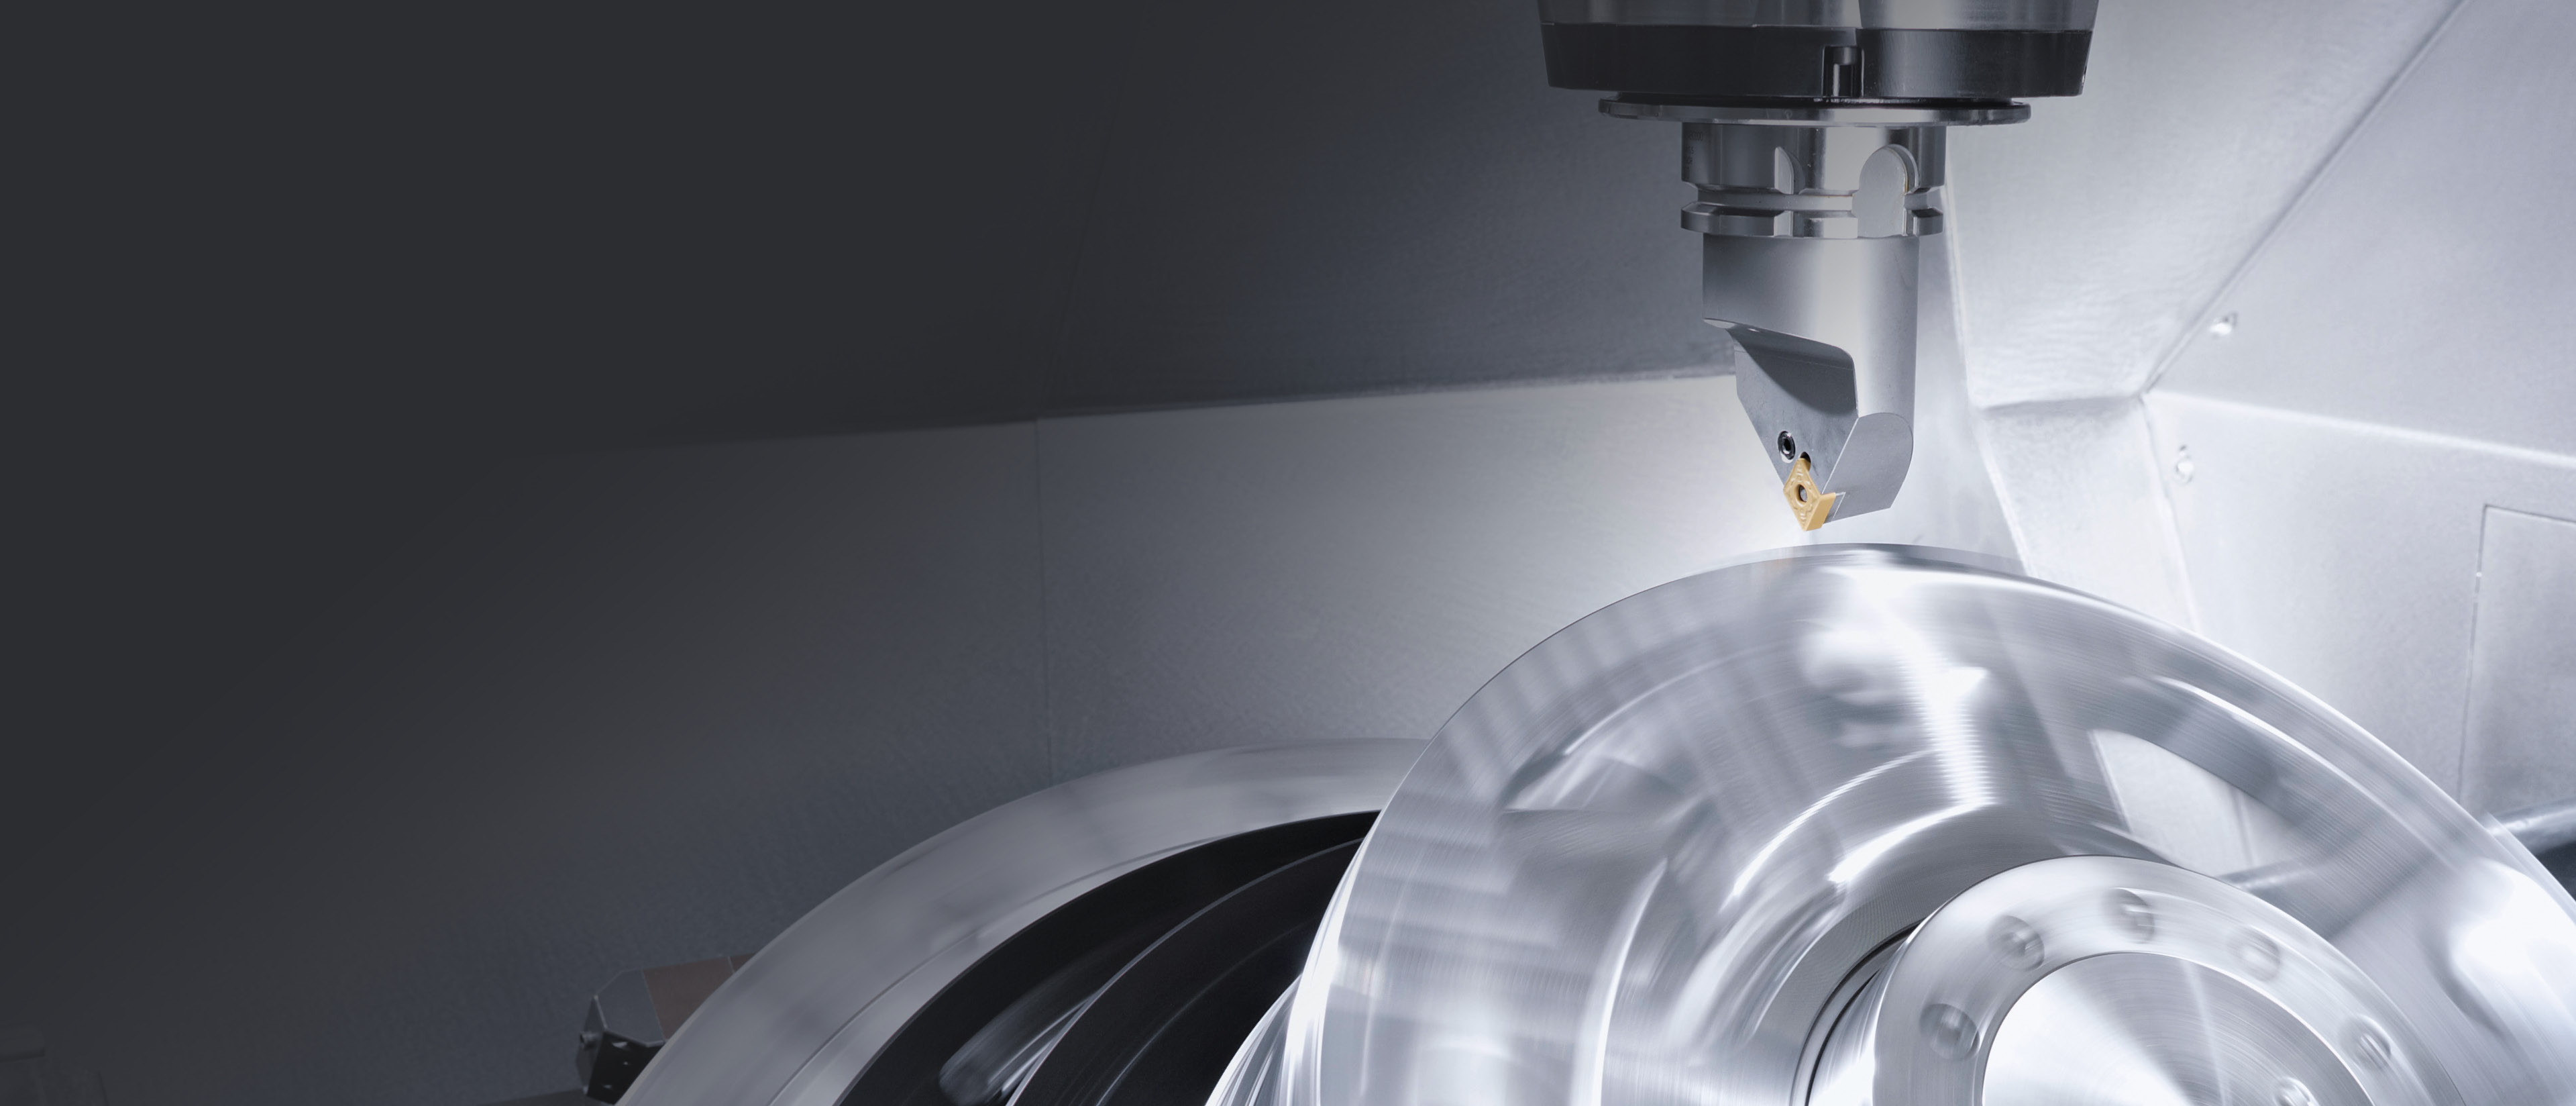 Mill & Turn (FD) – Turning on 5-axis milling machines